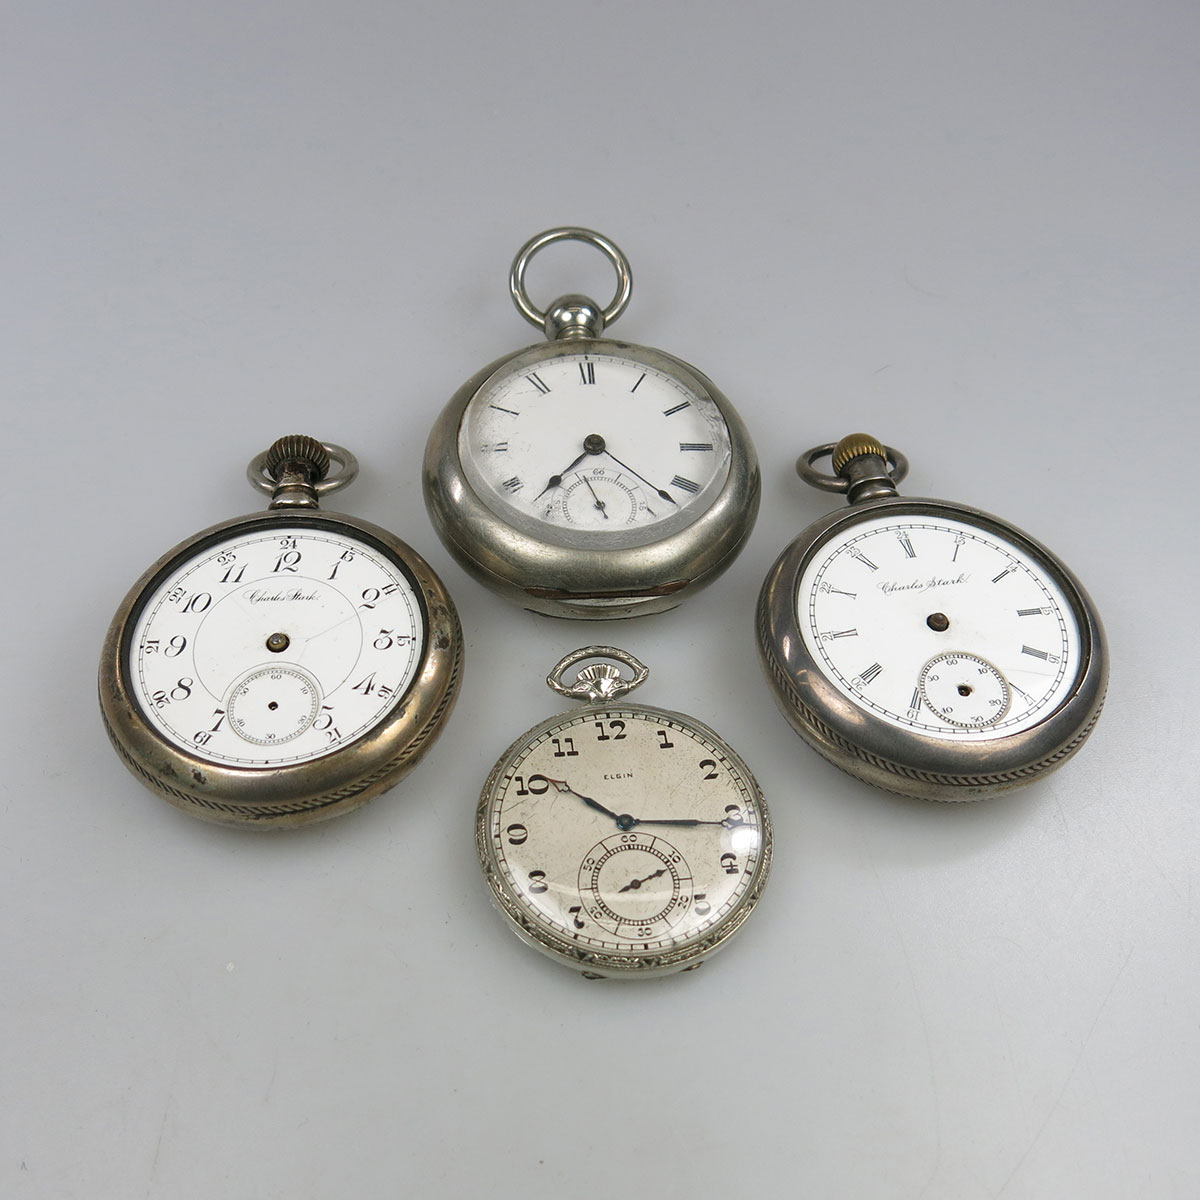 Two Charles Stark Of Toronto Pocket Watches